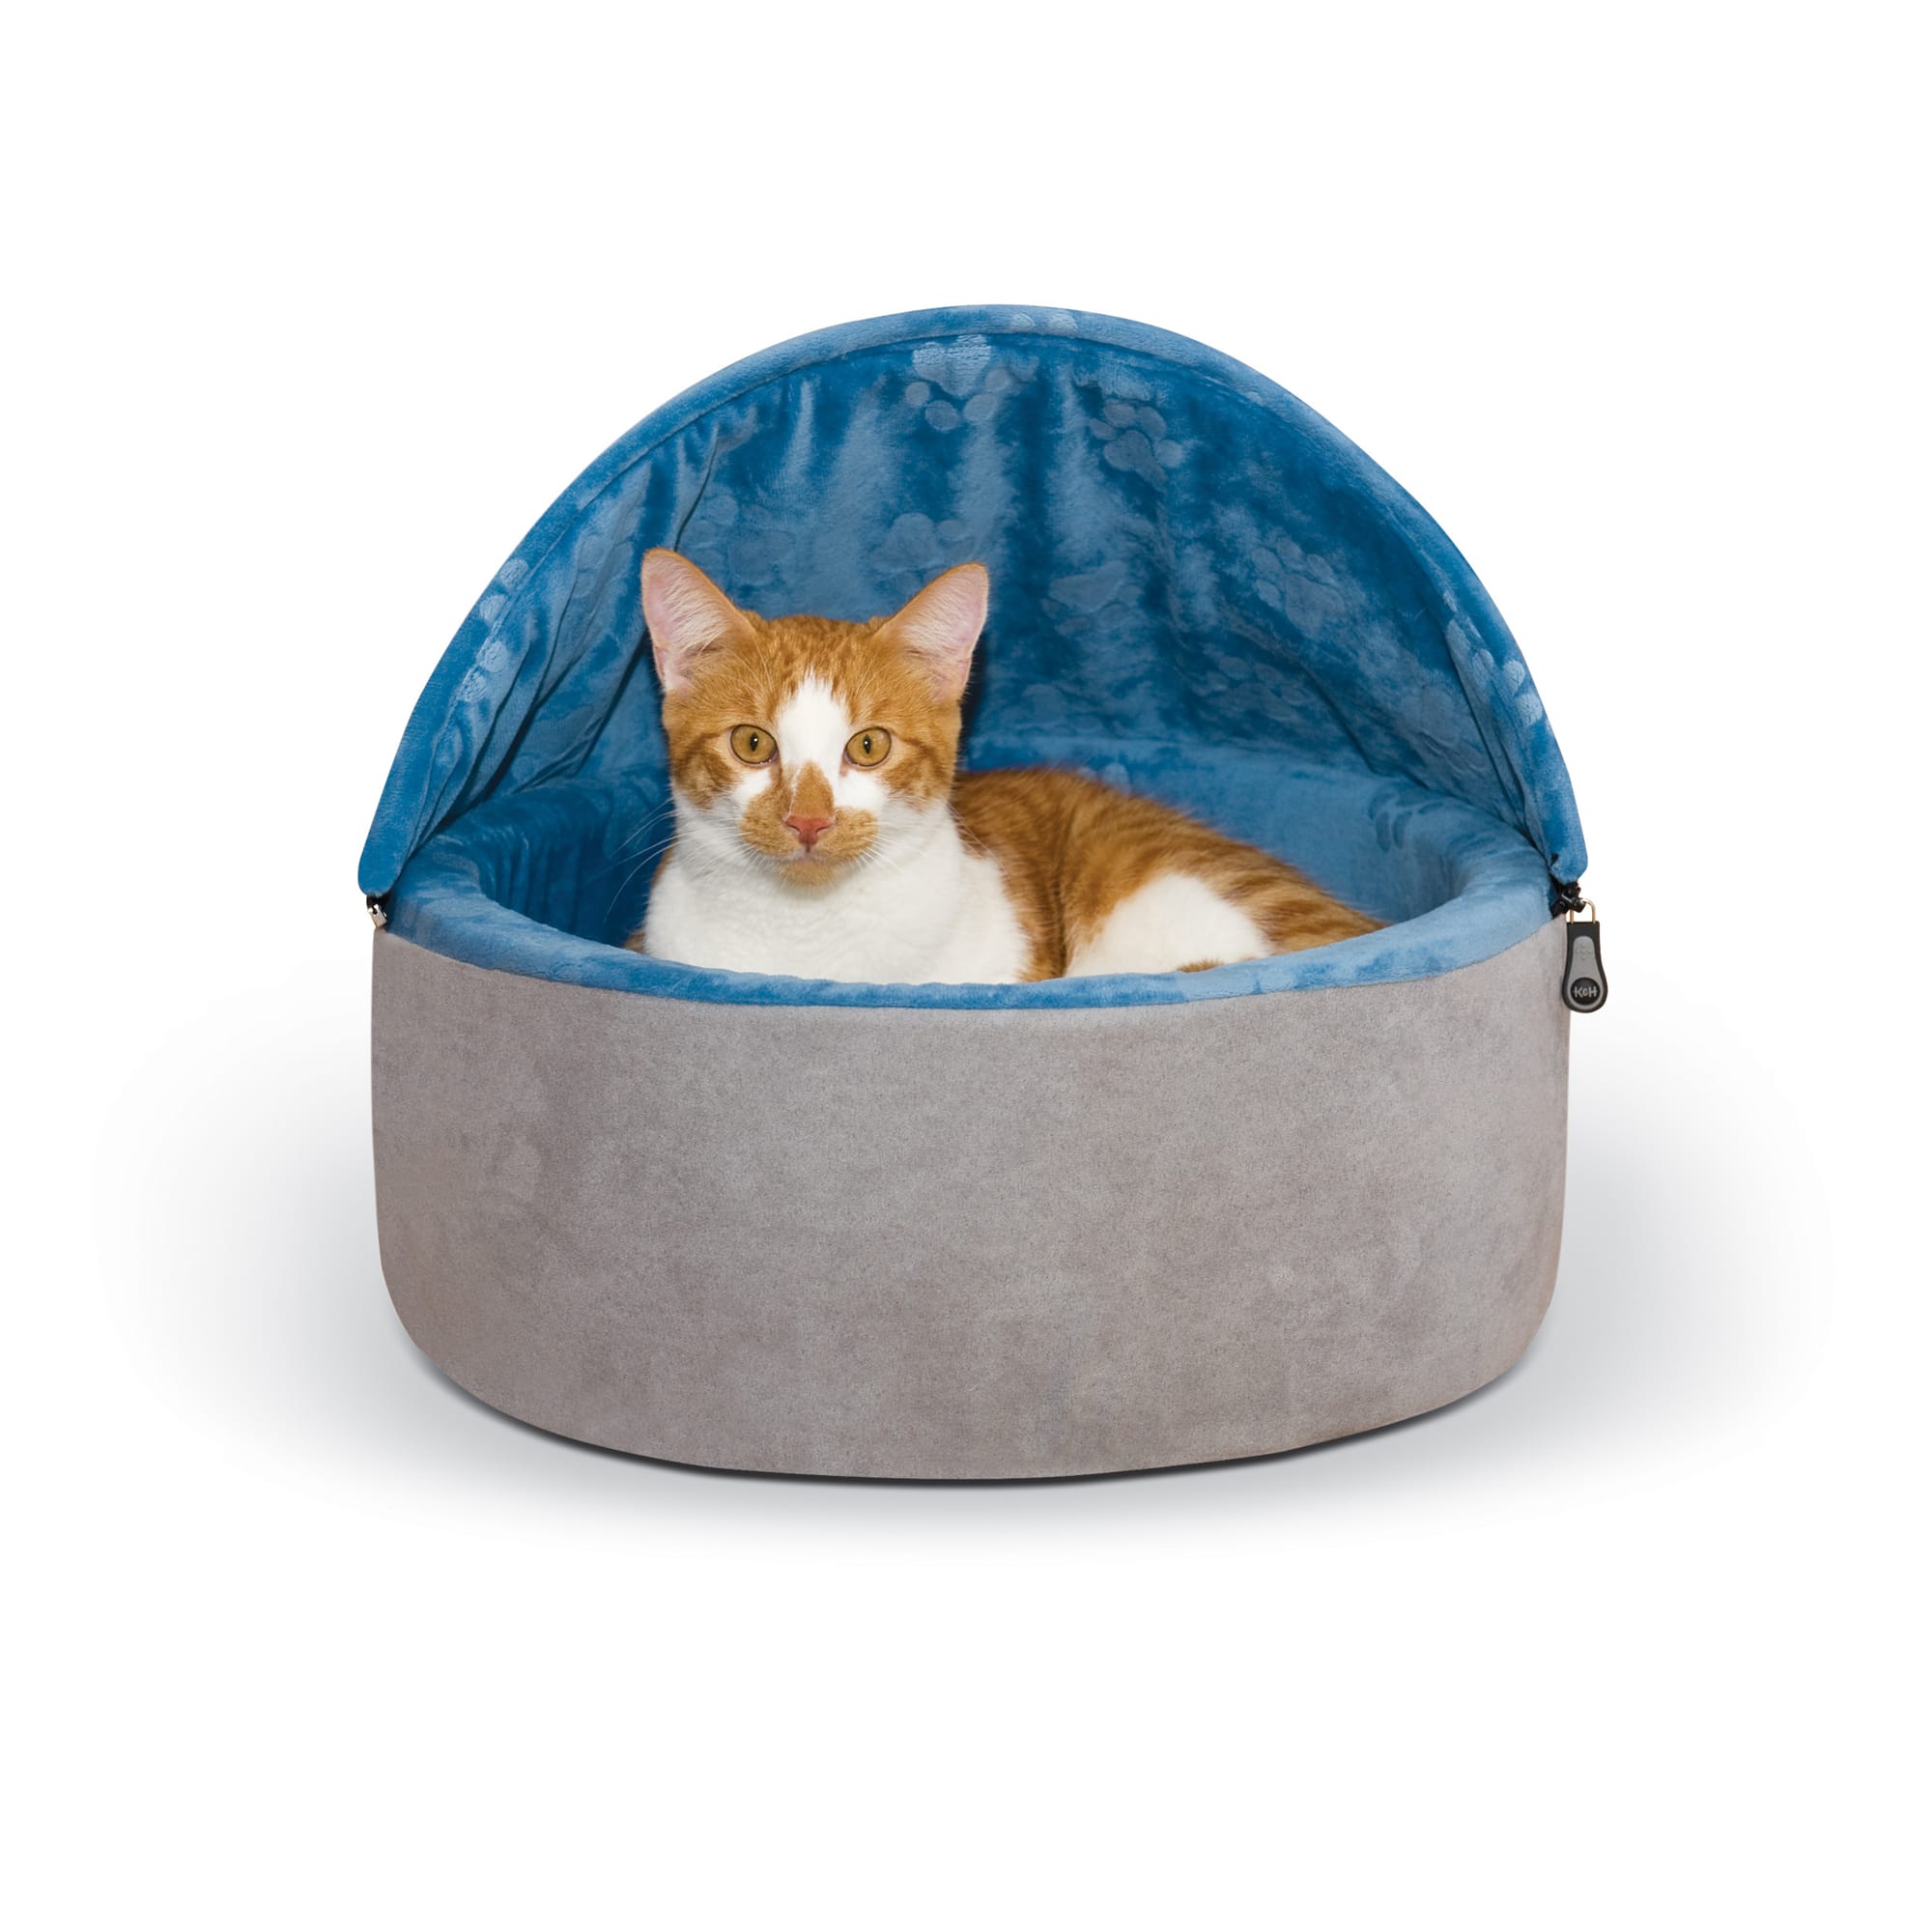 Photos - Bed & Furniture K&H Blue and Gray Self Warming Hooded Cat bed, 16" L x 16" W, Small, B 